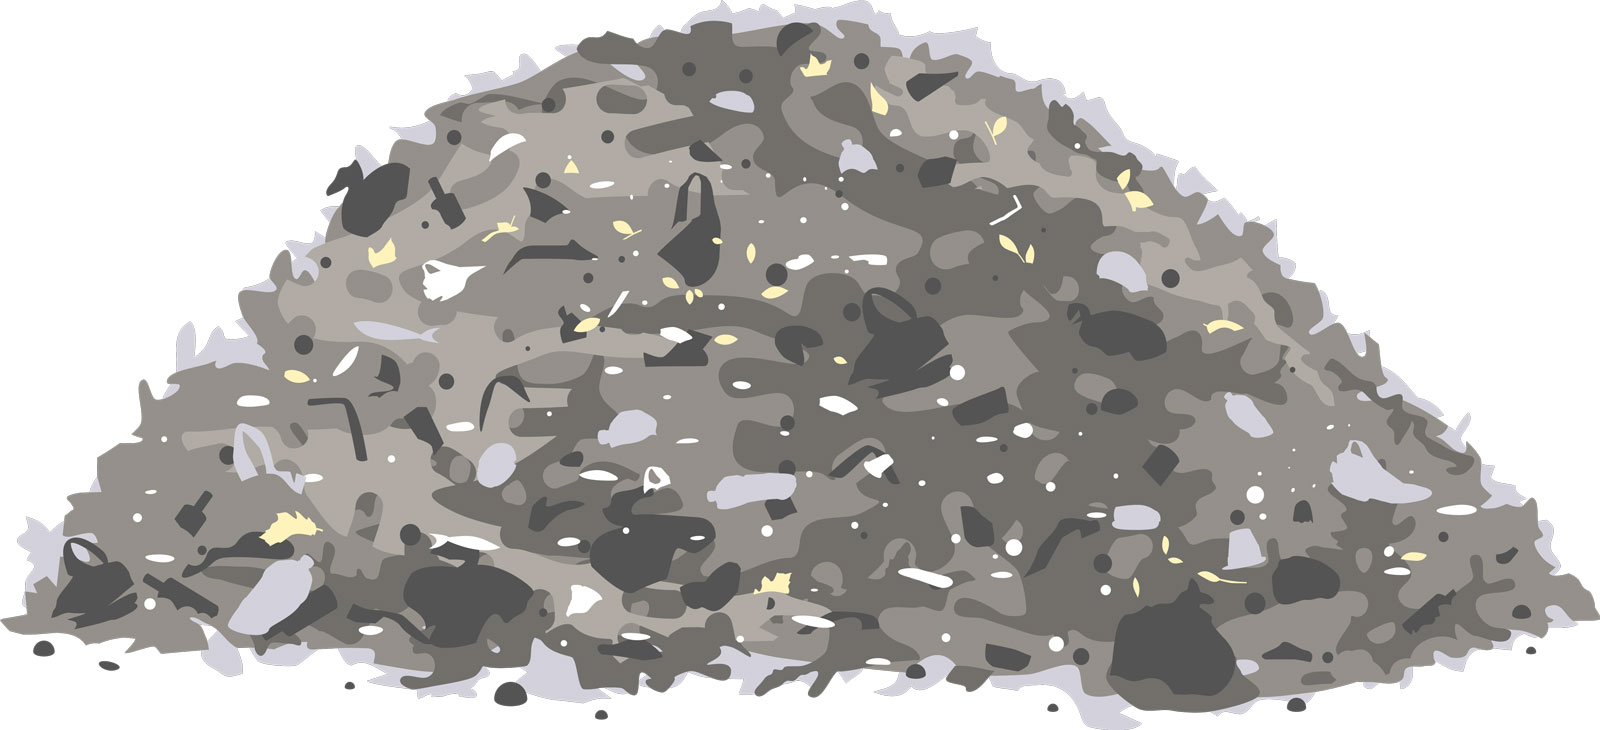 Illustration of pile of garbage - fatbergs are filled with wipes